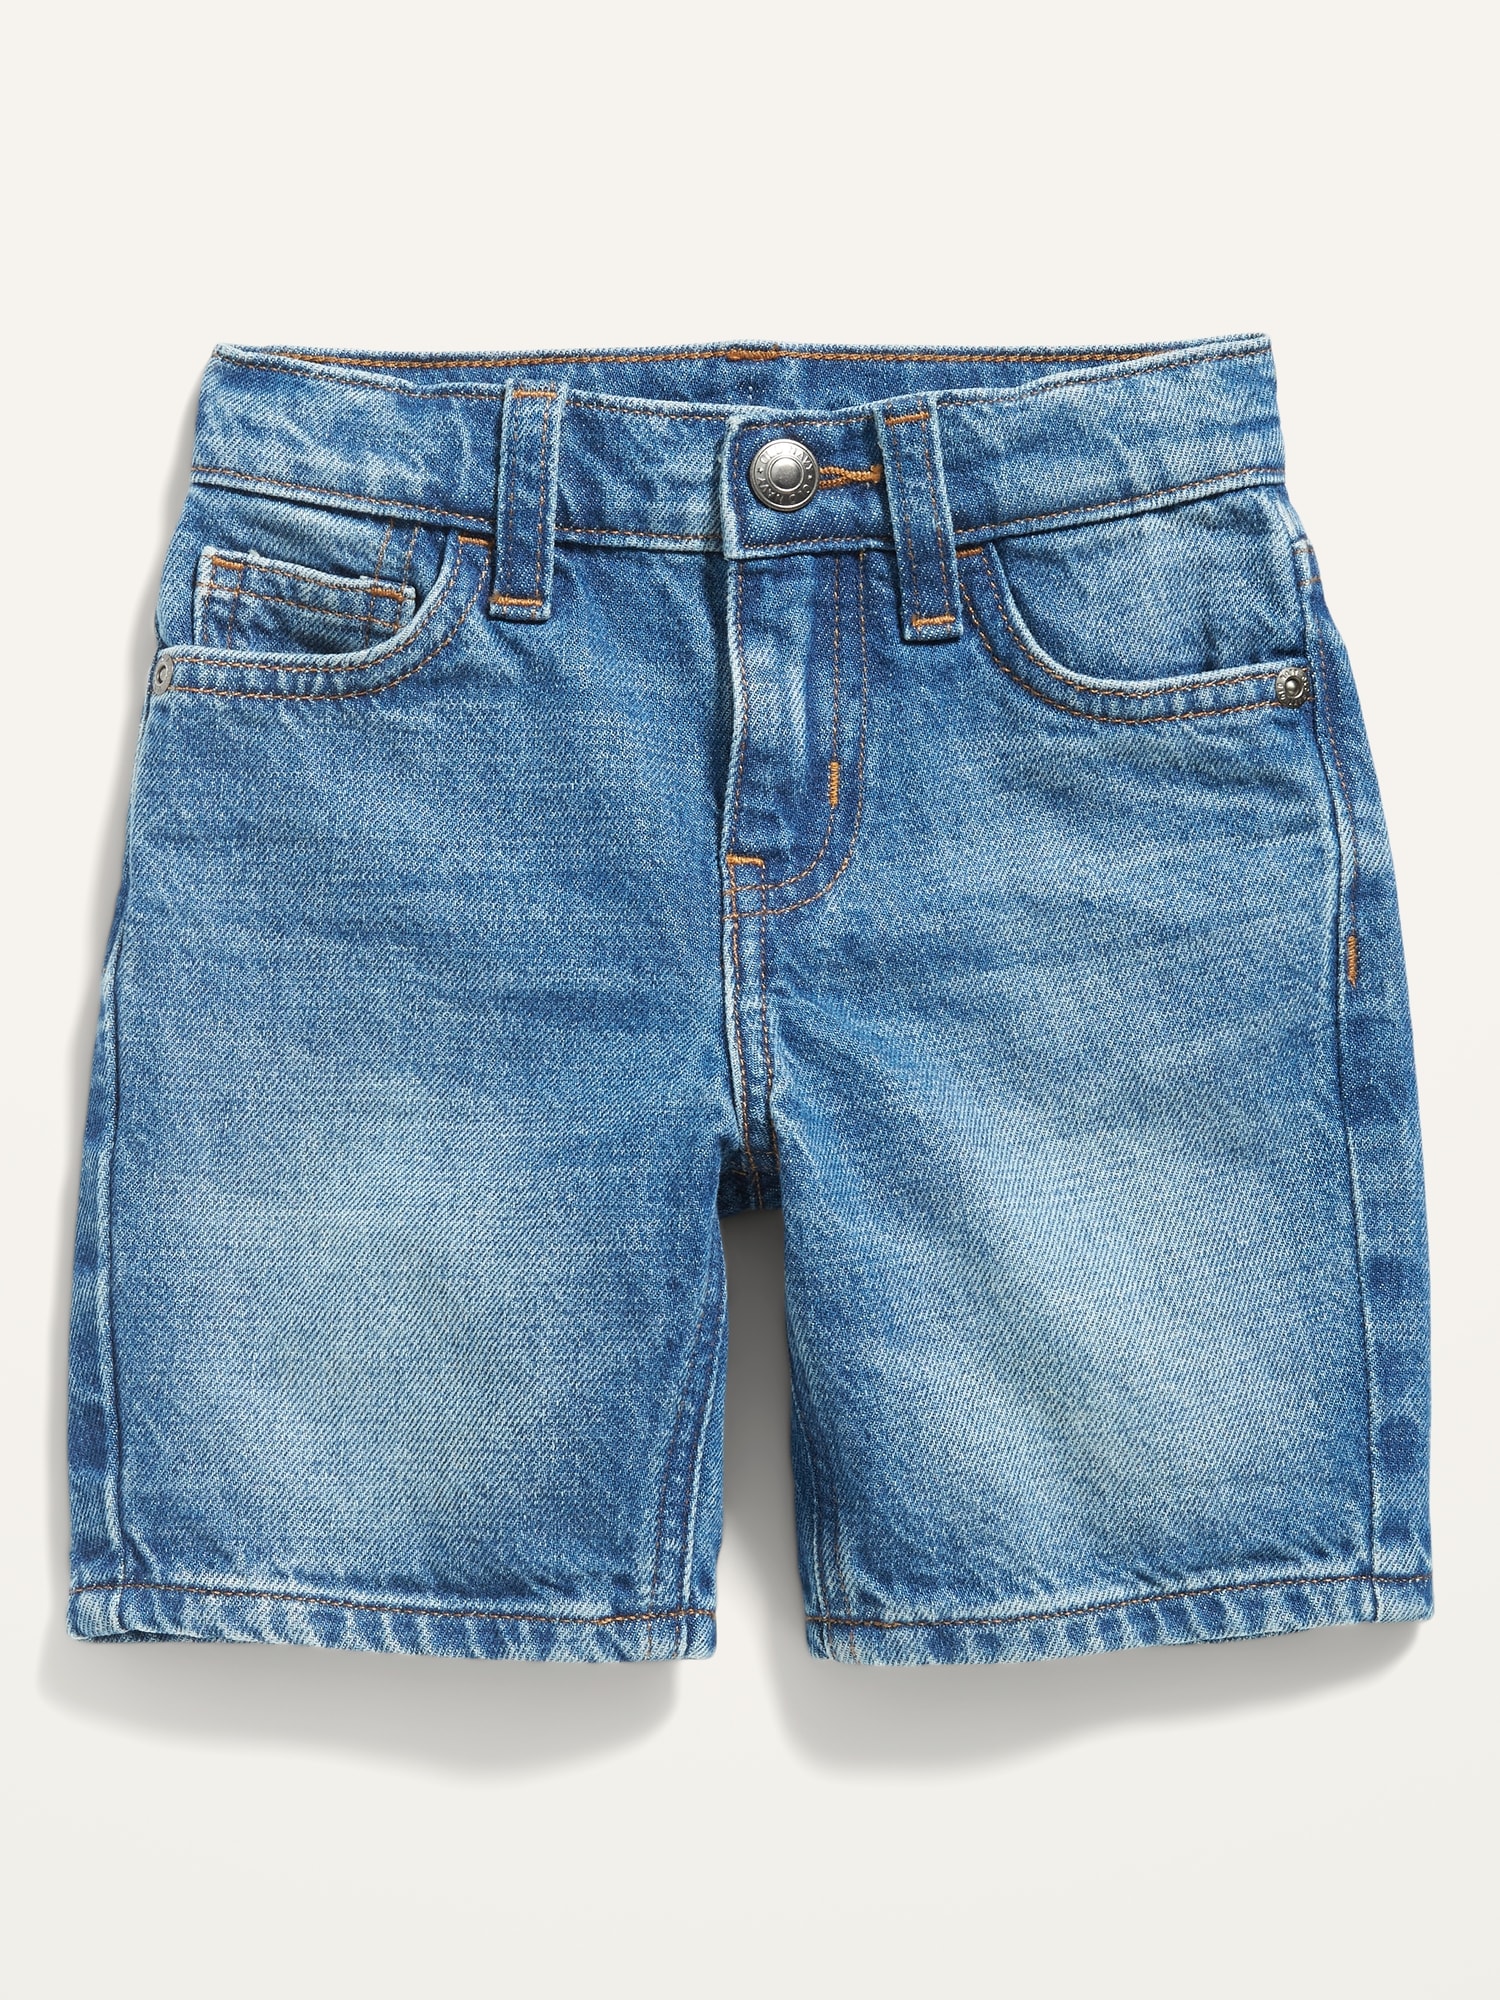 Loose Jean Shorts for Toddler Boys | Old Navy